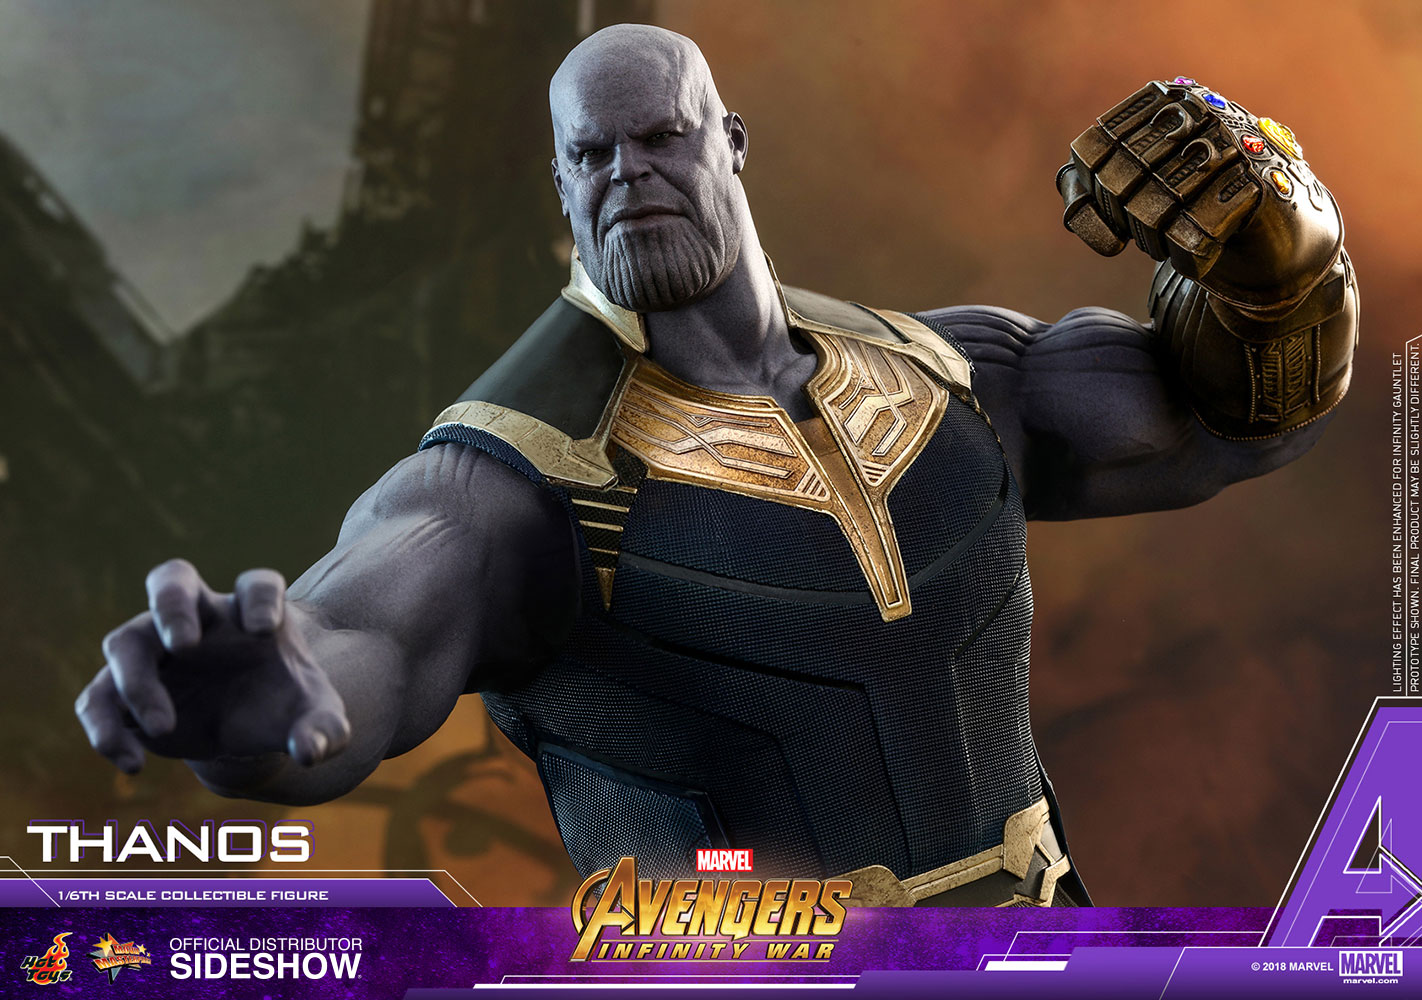 marvel-avengers-infinity-war-thanos-sixth-scale-figure-hot-toys-903429-09